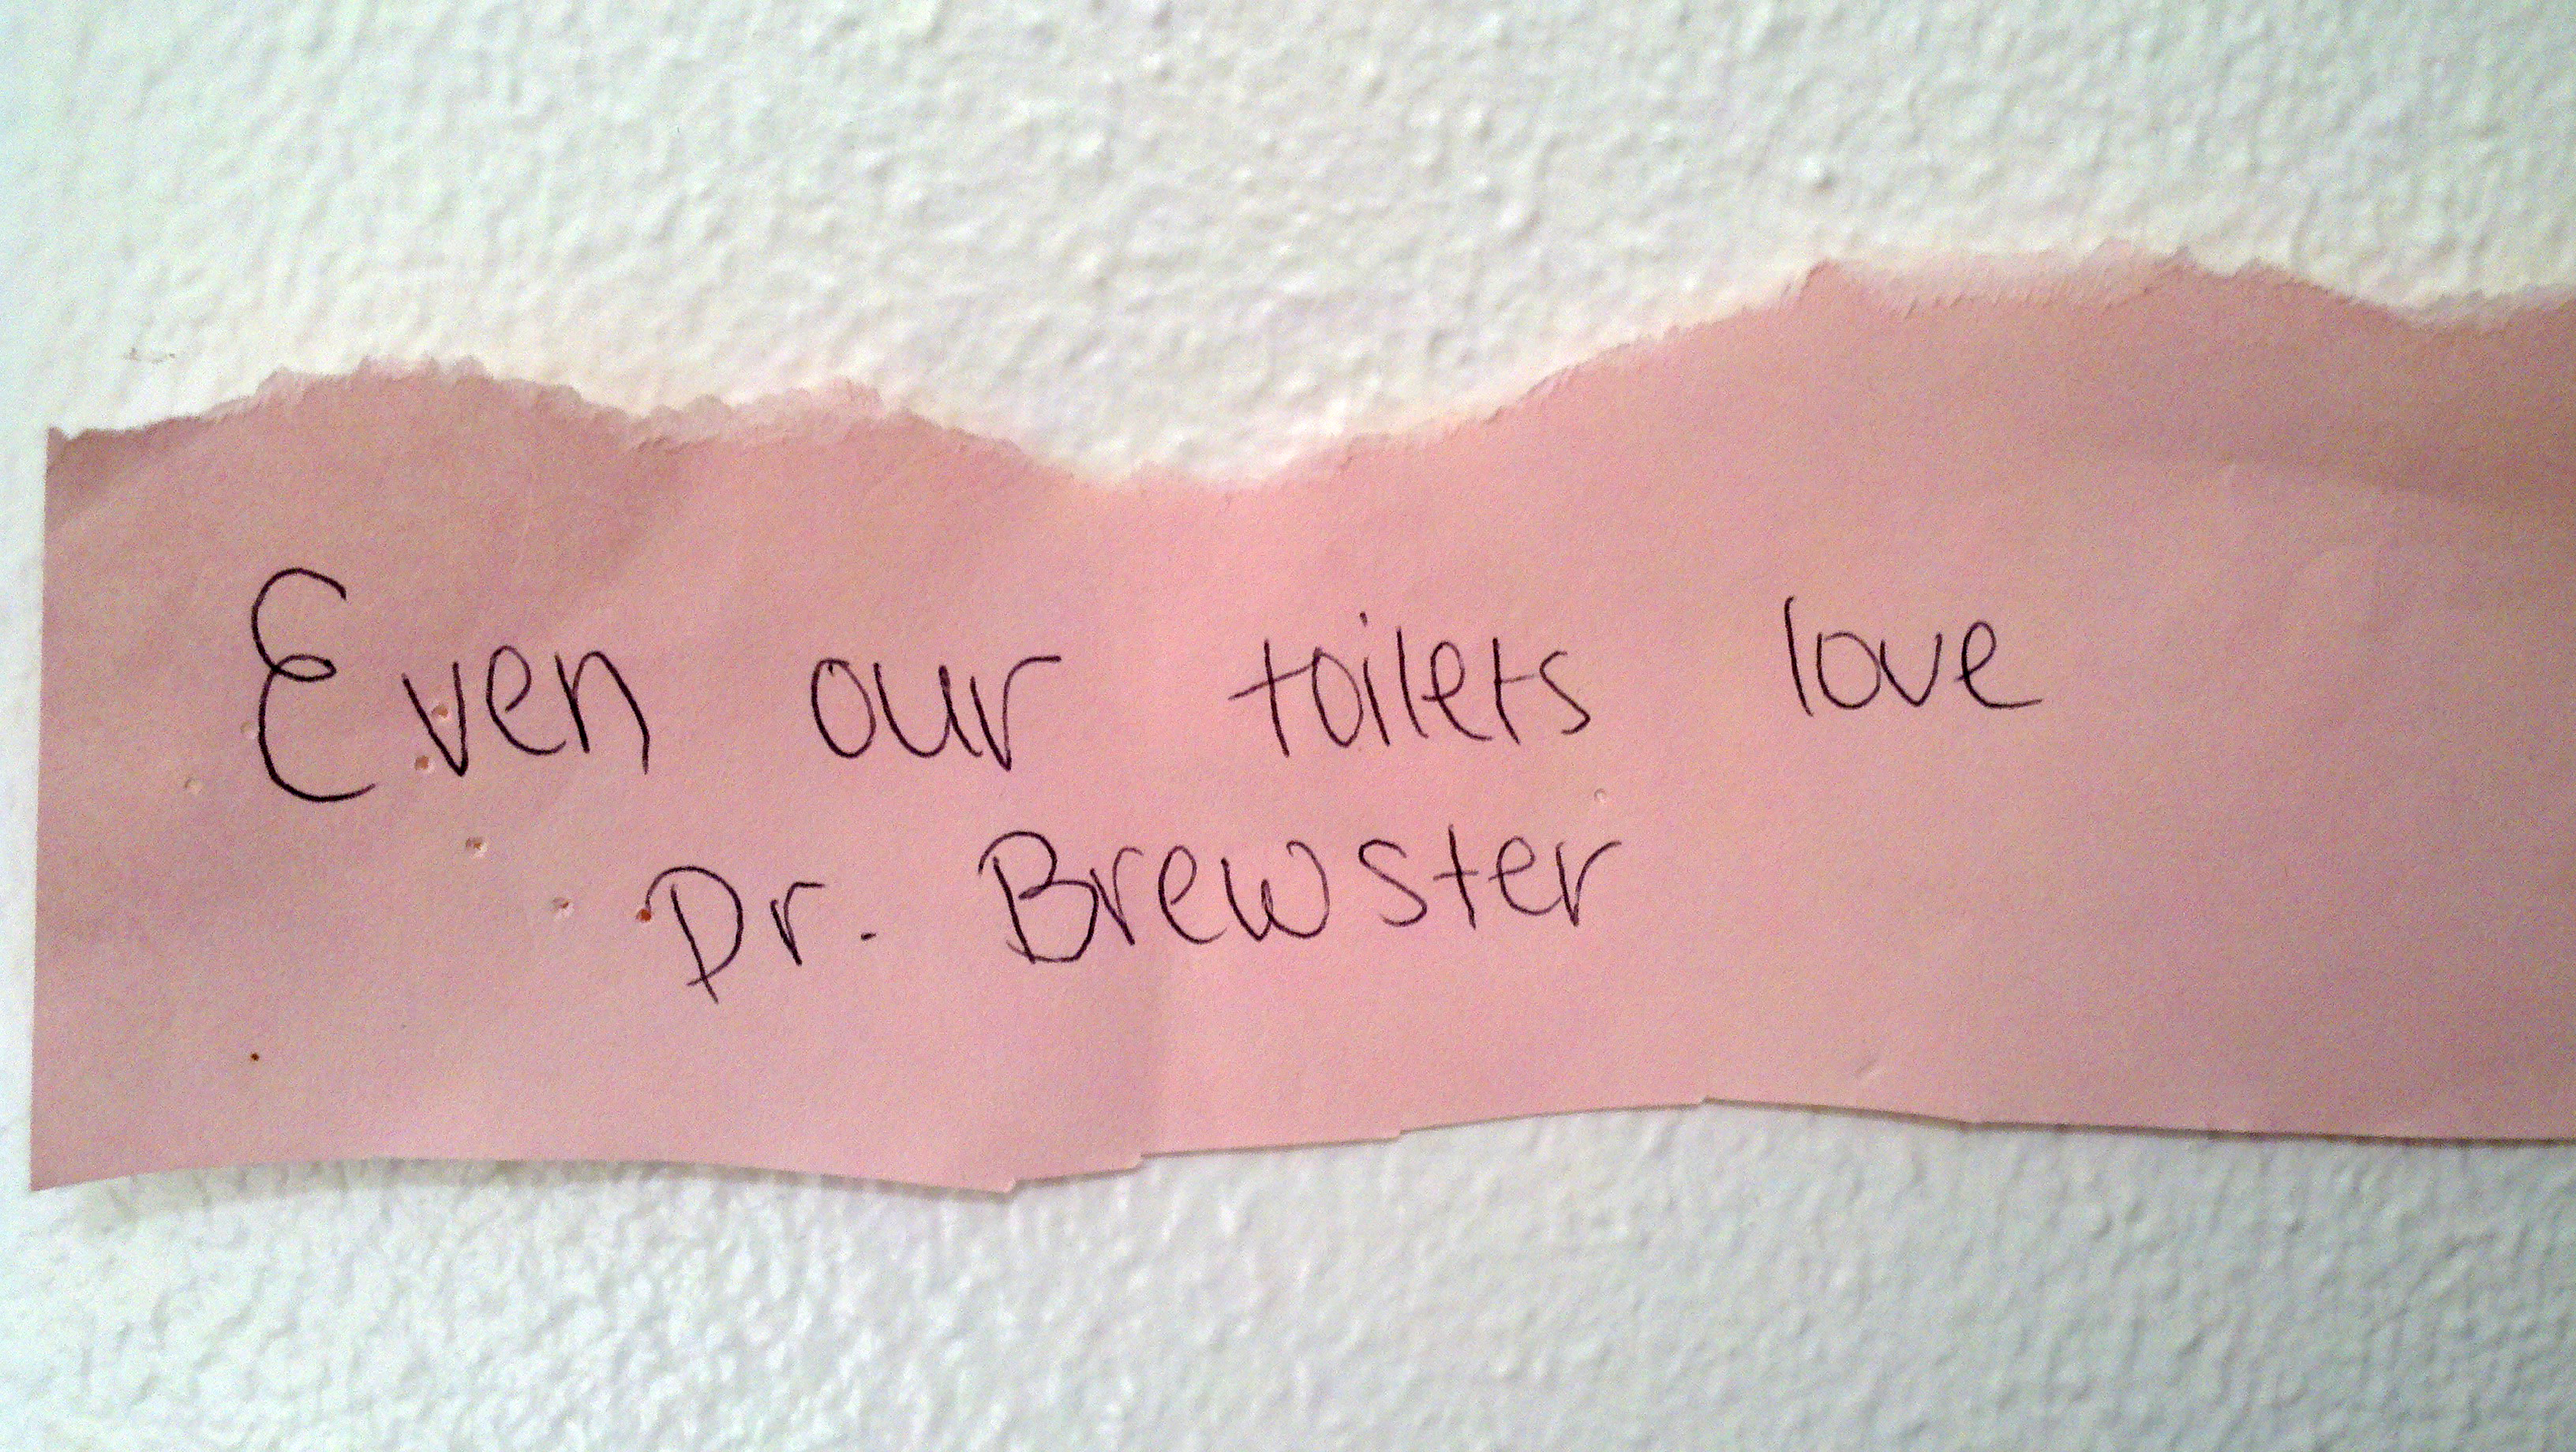 Scrap of paper that reads: Even our toilets love Dr Brewster